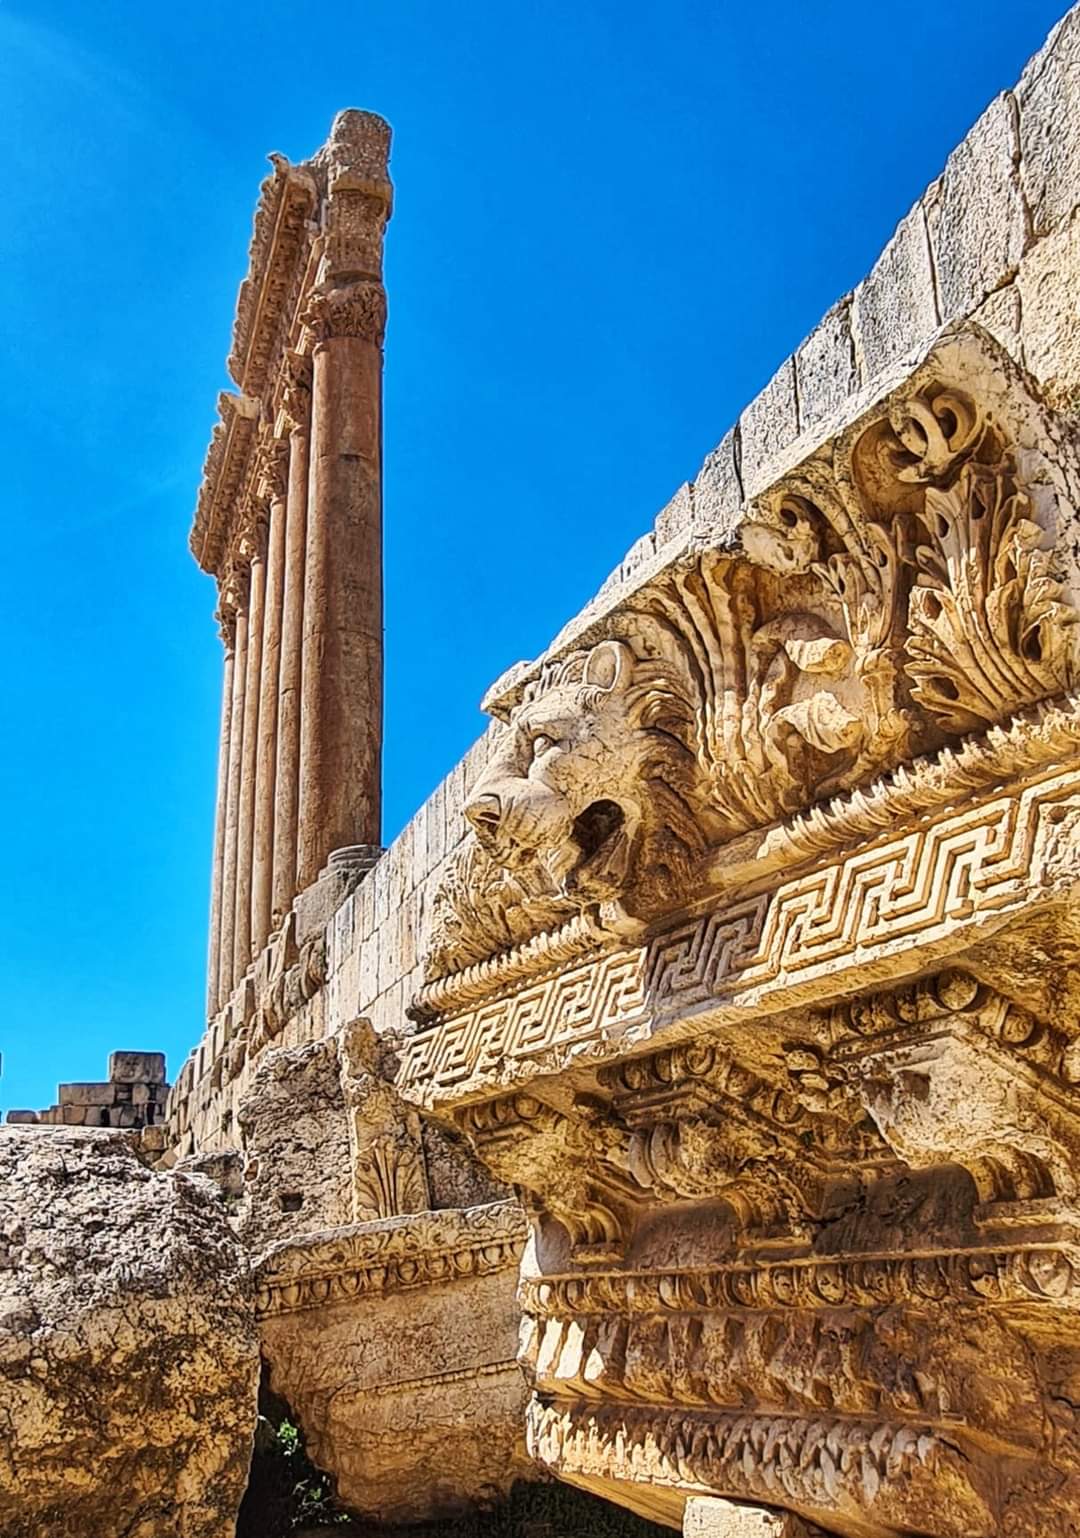 The temples of Baalbek in the Lebanon